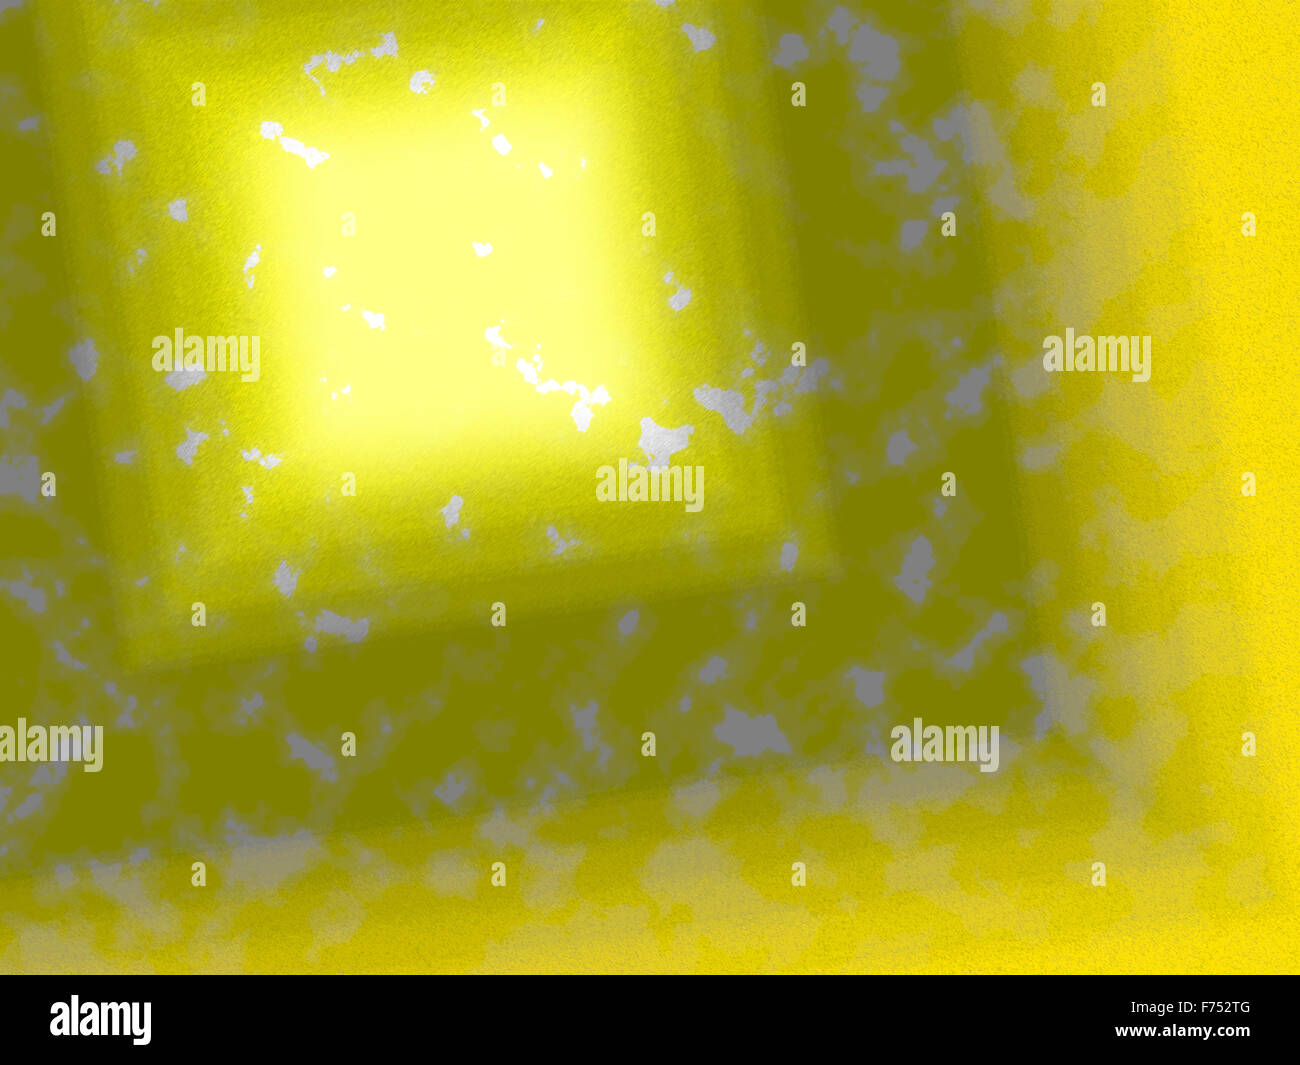 Abstract yellow gradient frame background. Stock Photo